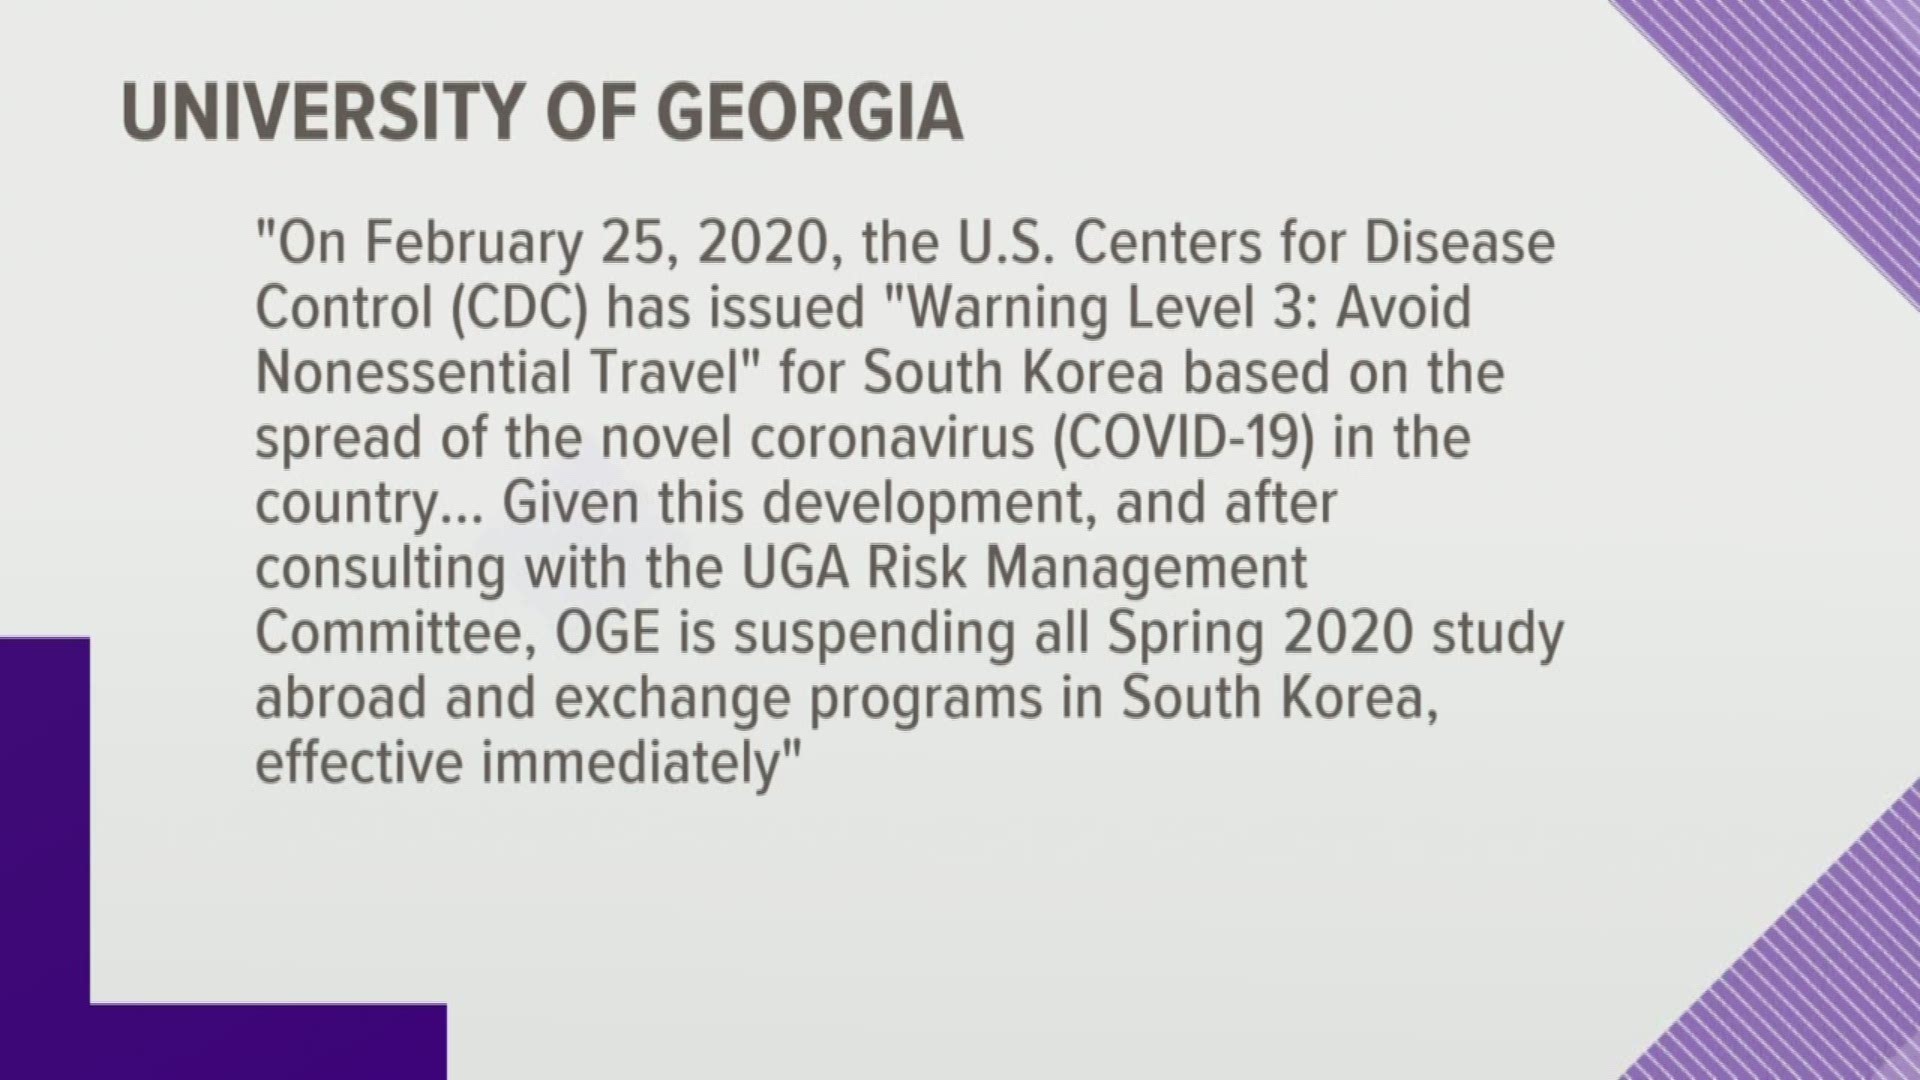 This comes after the CDC issued a "Warning Level Level 3" for travel due to the spread of the novel coronavirus.